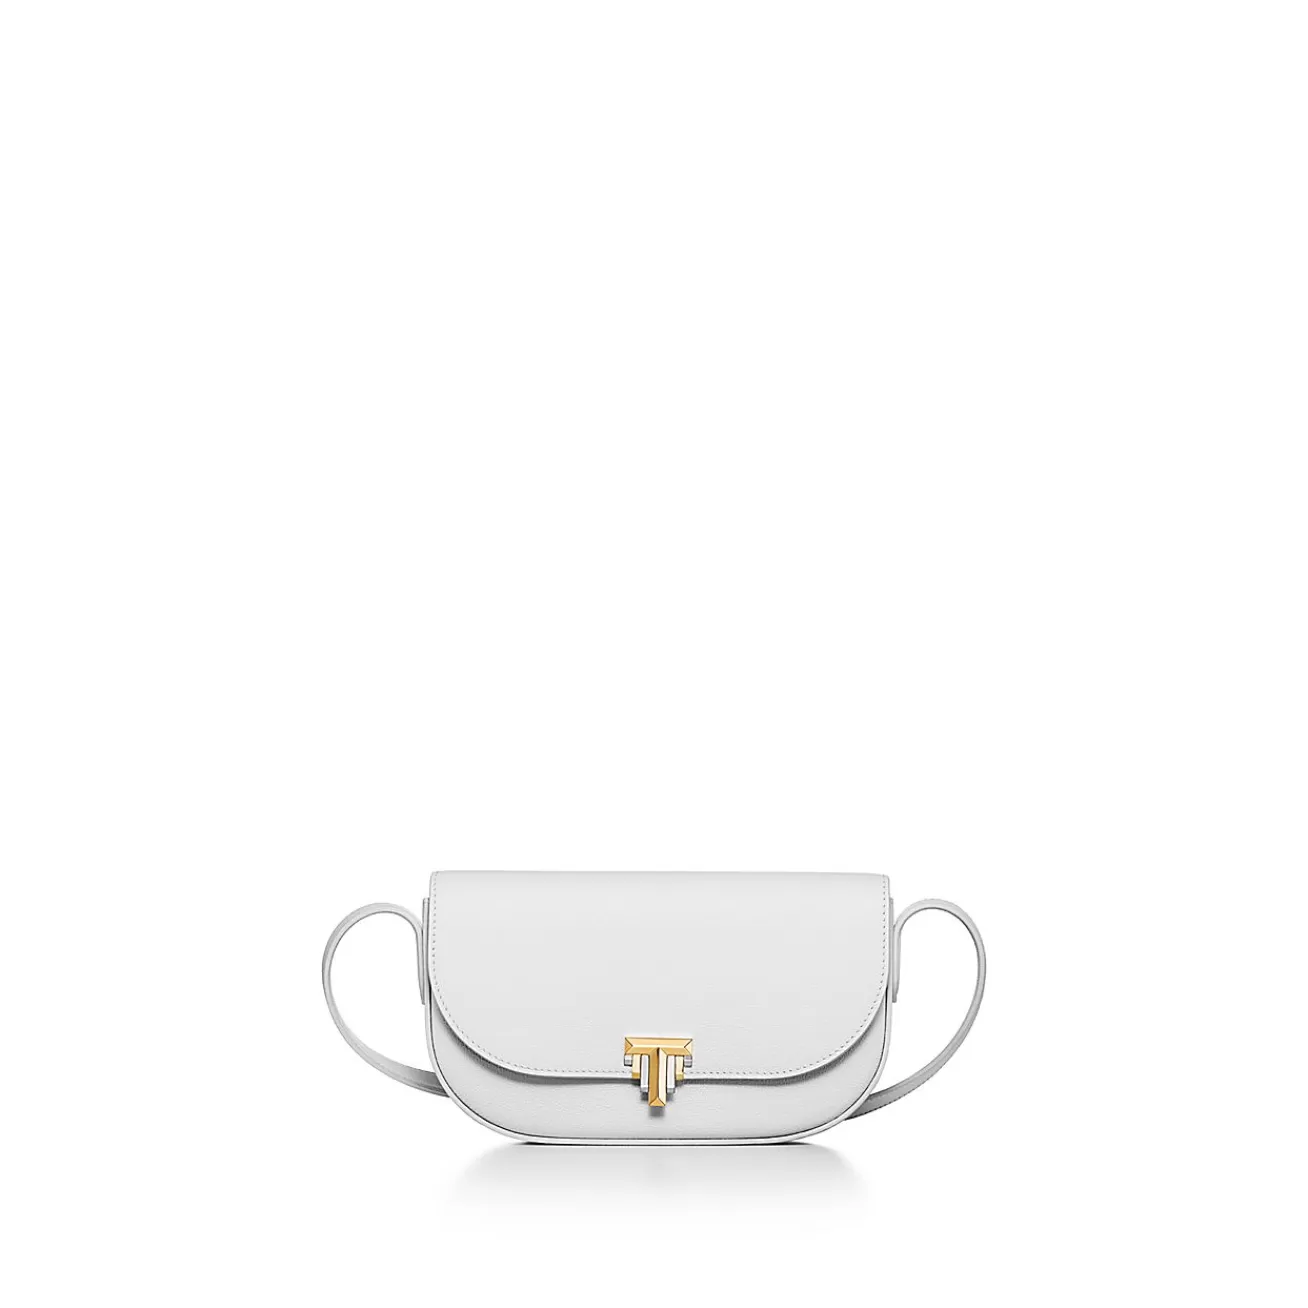 Tiffany & Co. Tiffany T Deco Crossbody Wallet in White Calf Leather | ^Women Small Leather Goods | Women's Accessories